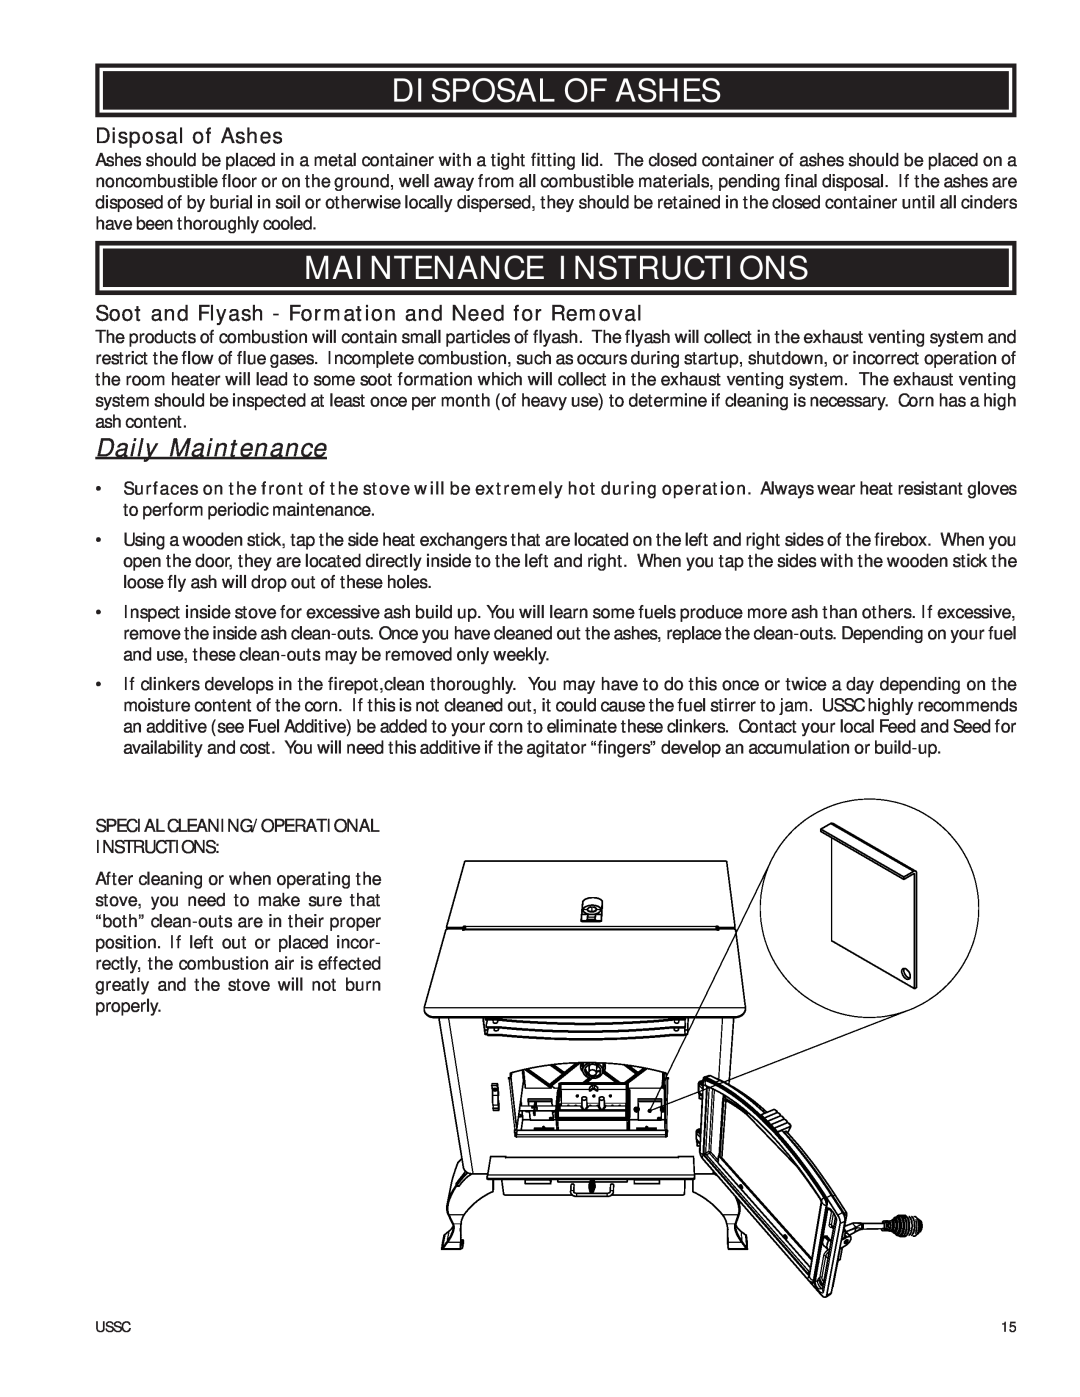 United States Stove 6039HF owner manual Disposal Of Ashes, Maintenance Instructions, Daily Maintenance, Disposal of Ashes 